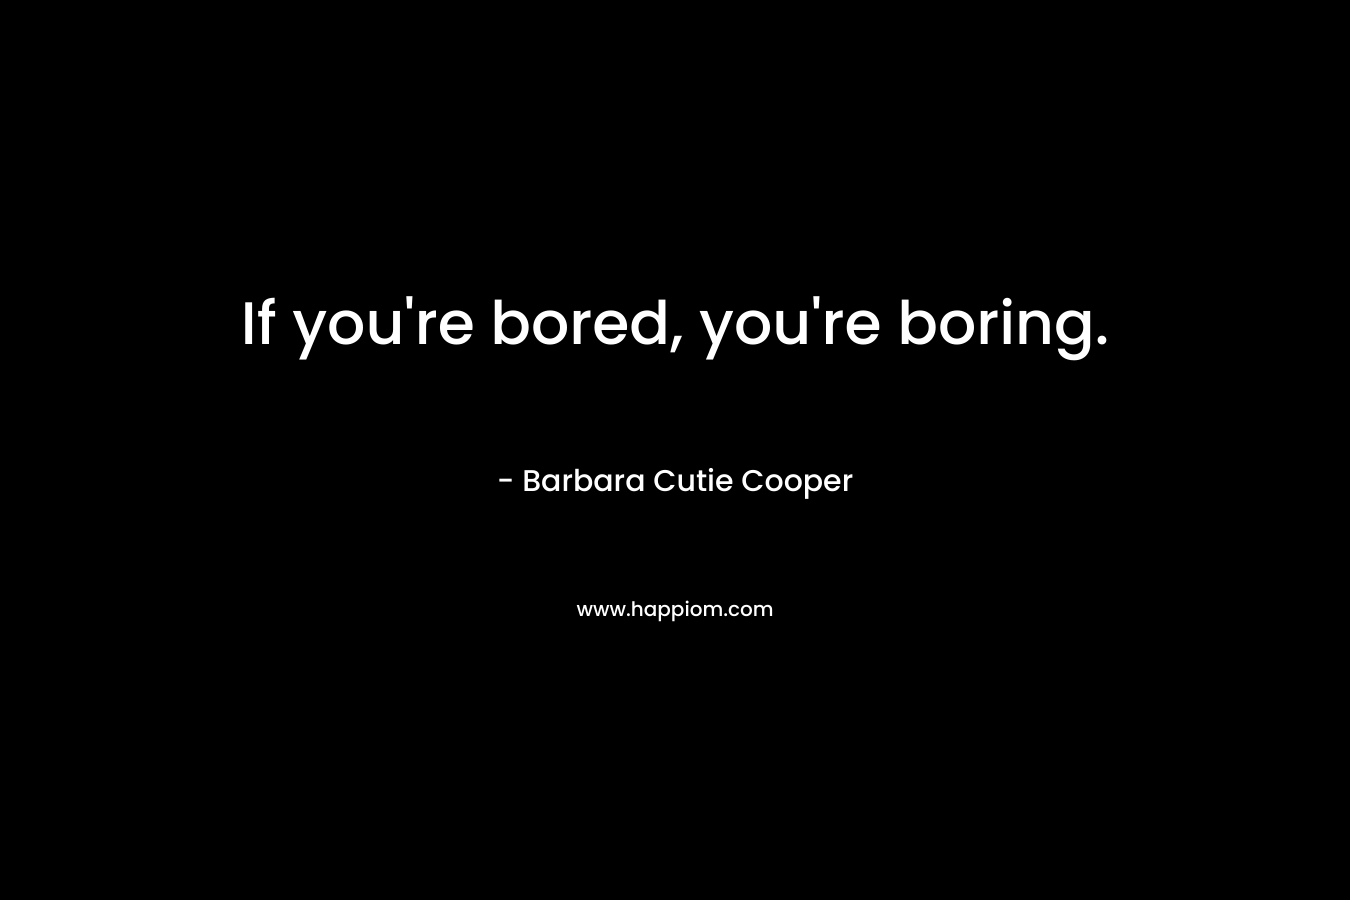 If you're bored, you're boring.